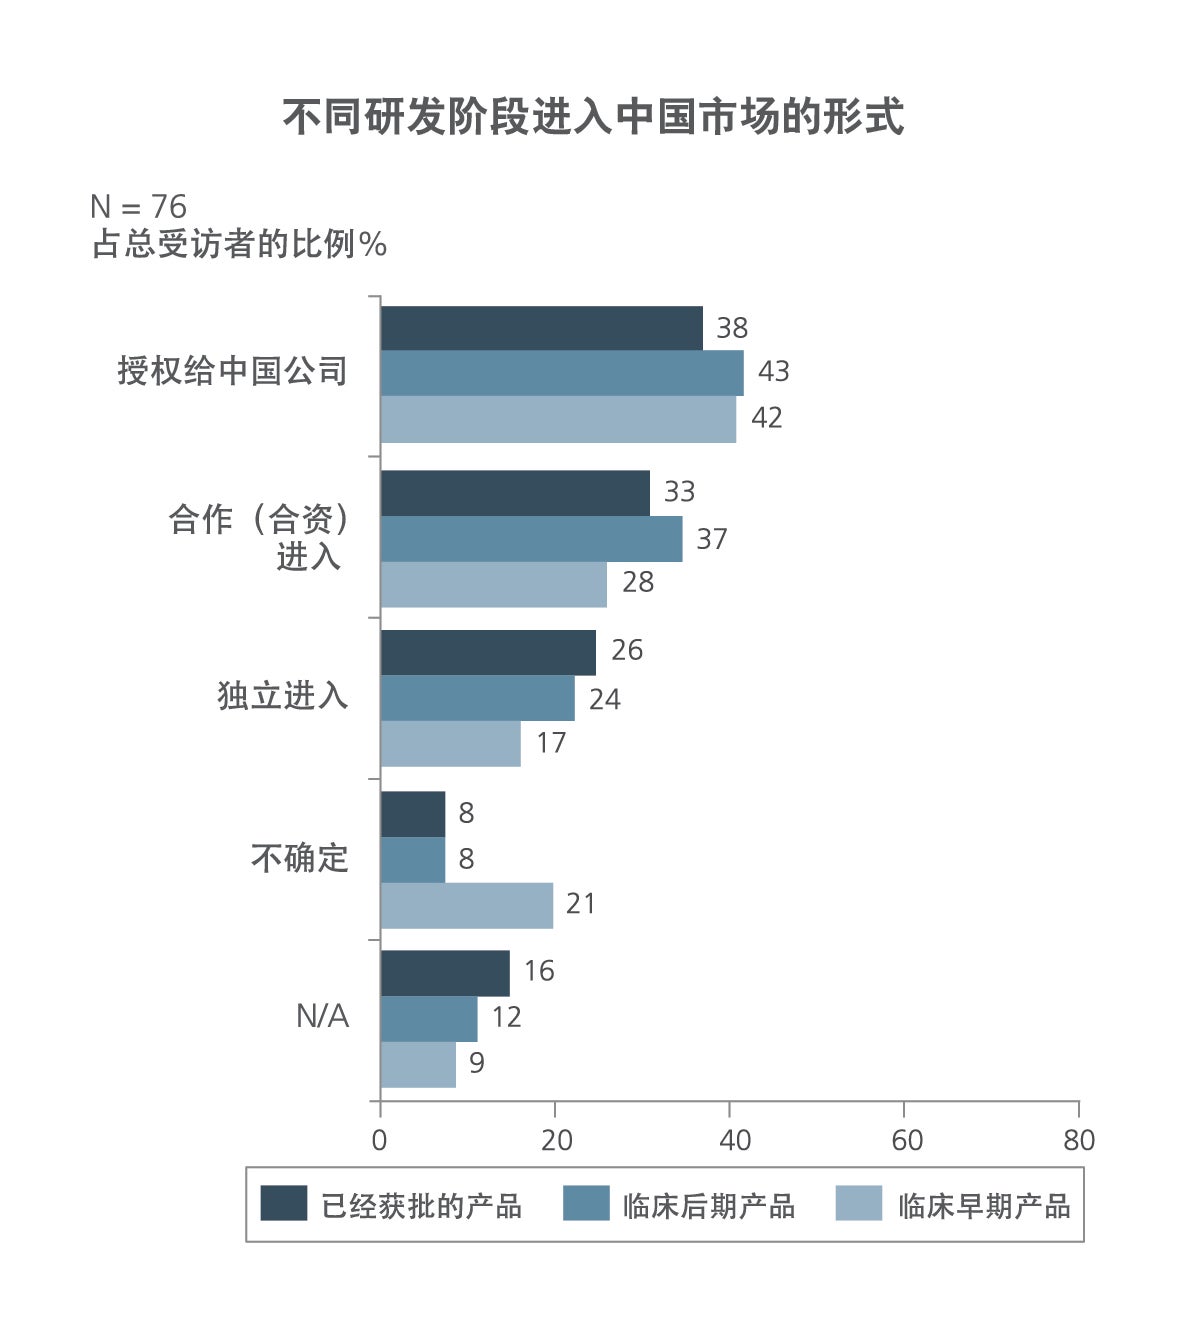 China entry preferences by stage